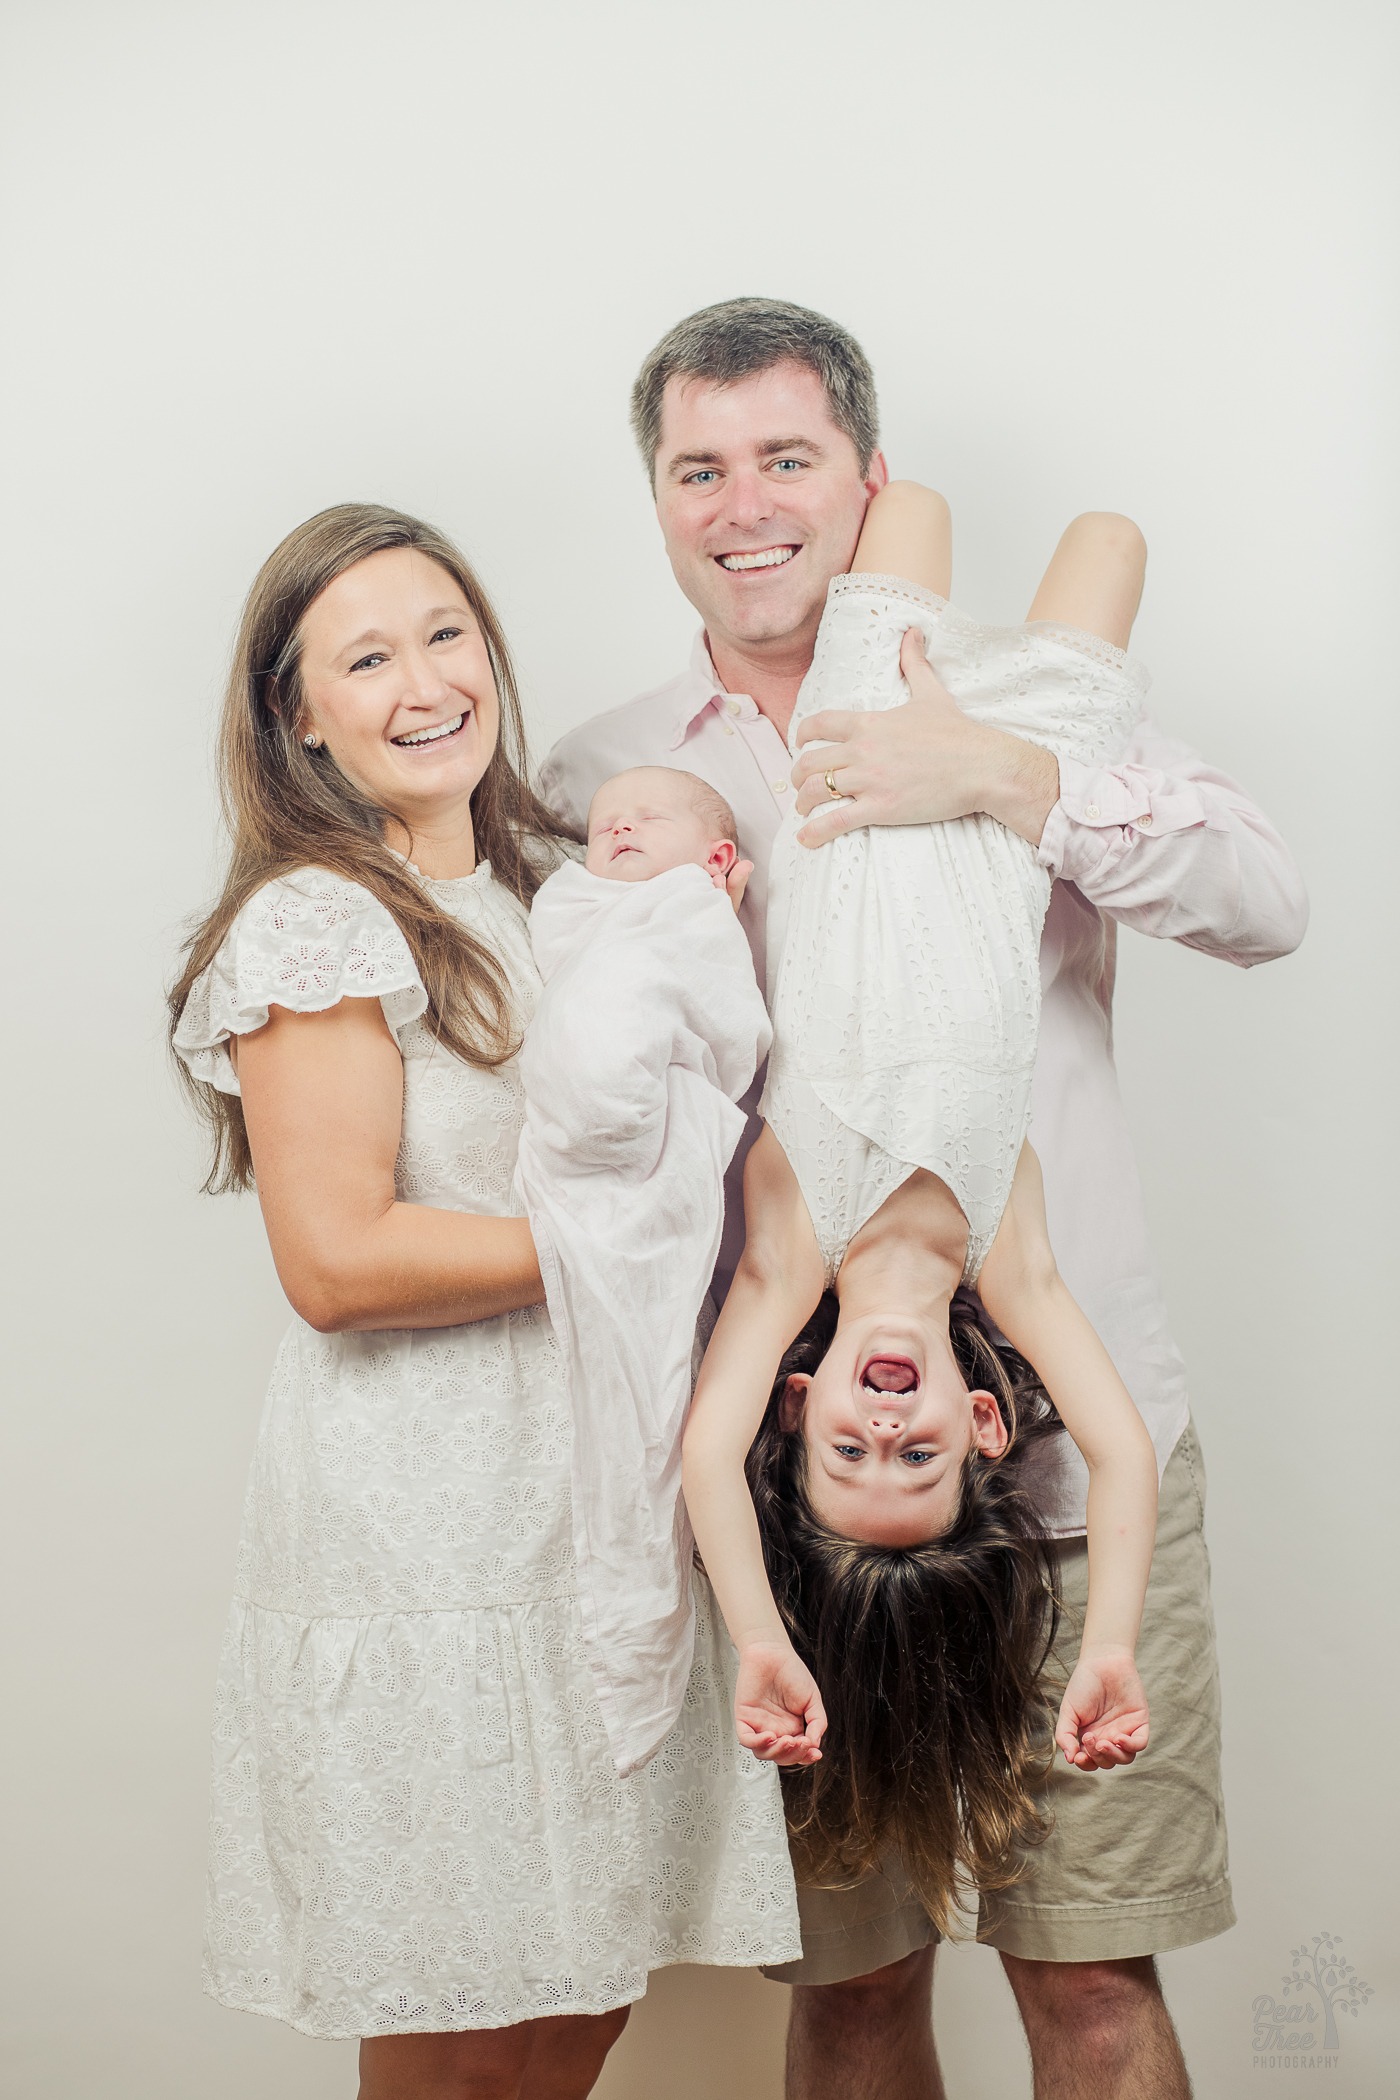 Mom and Dad holding their older and baby daughters. The older daughter is hanging upside down and laughing